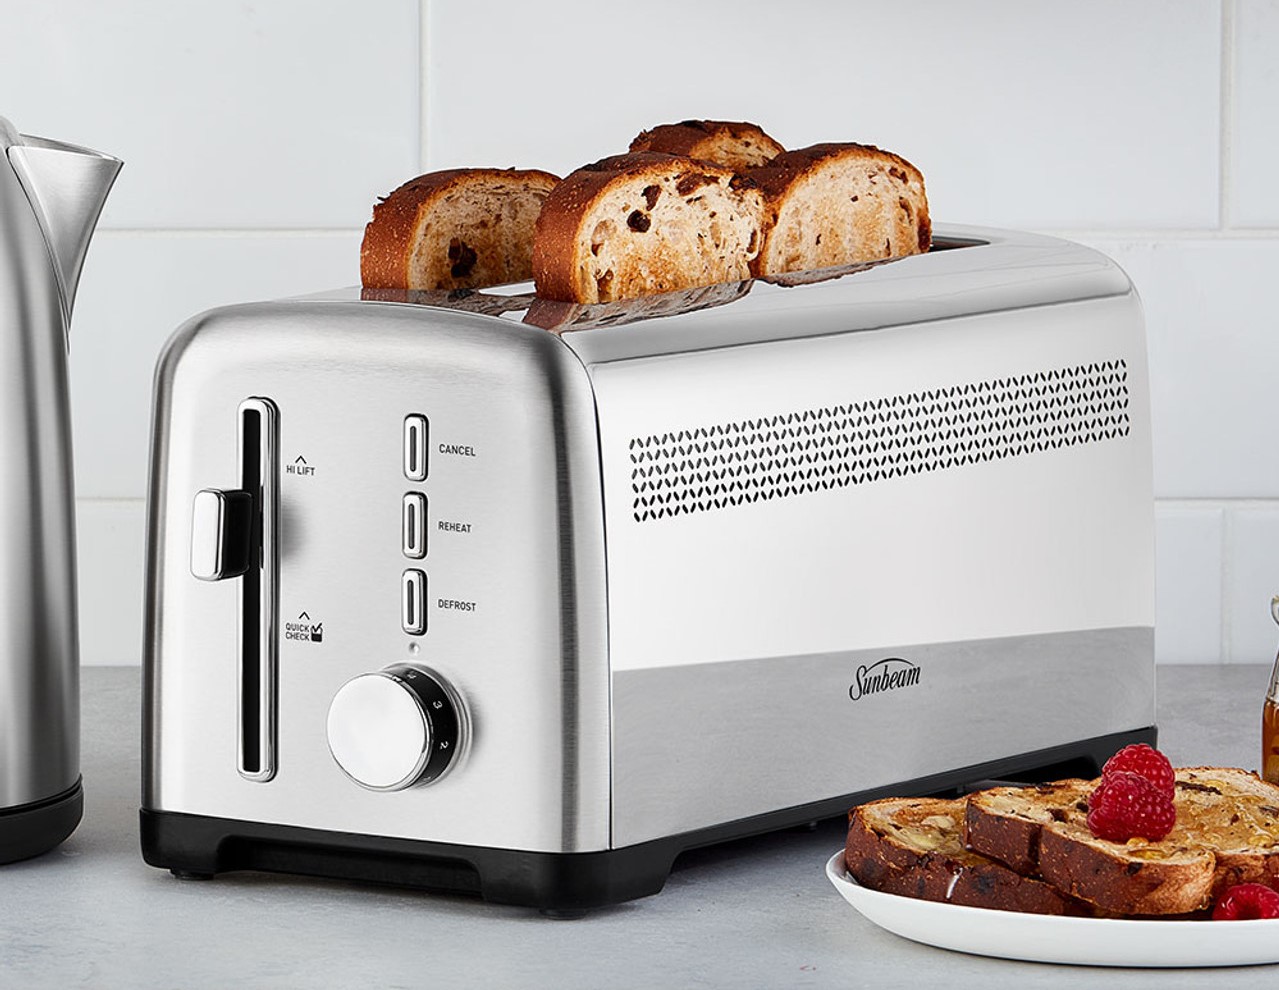 Mecity Toaster 2 Slice Stainless Steel Toaster Countdown Timer